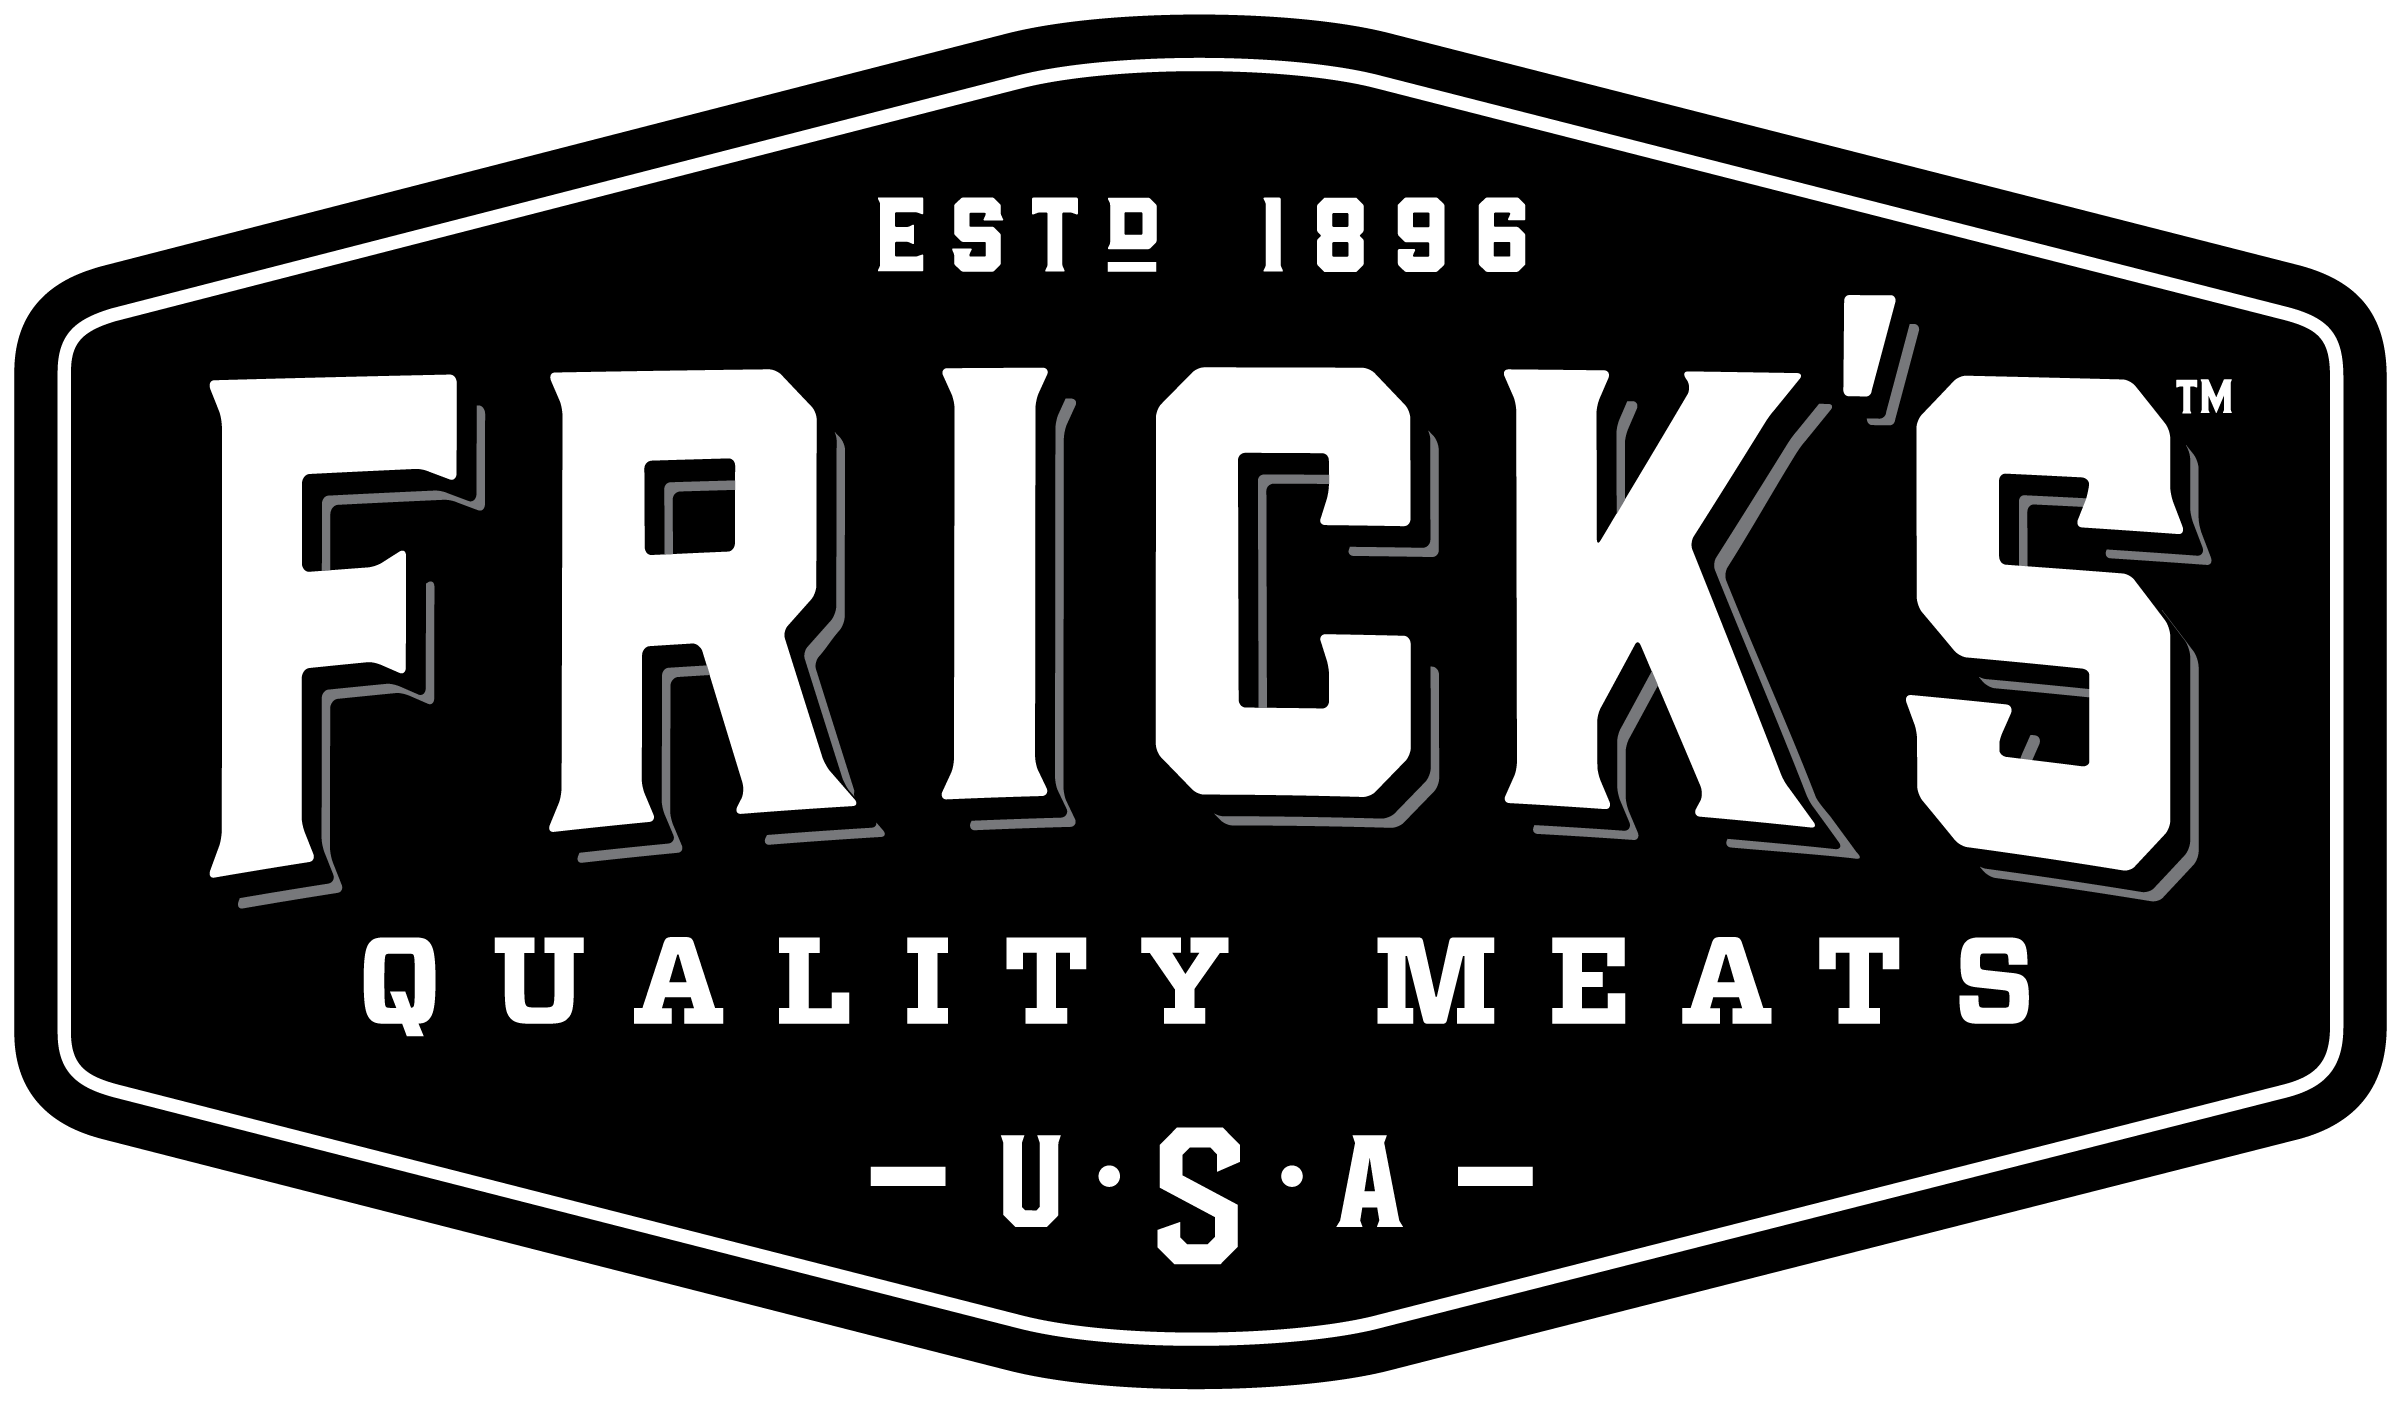 Frick's Quality Meats